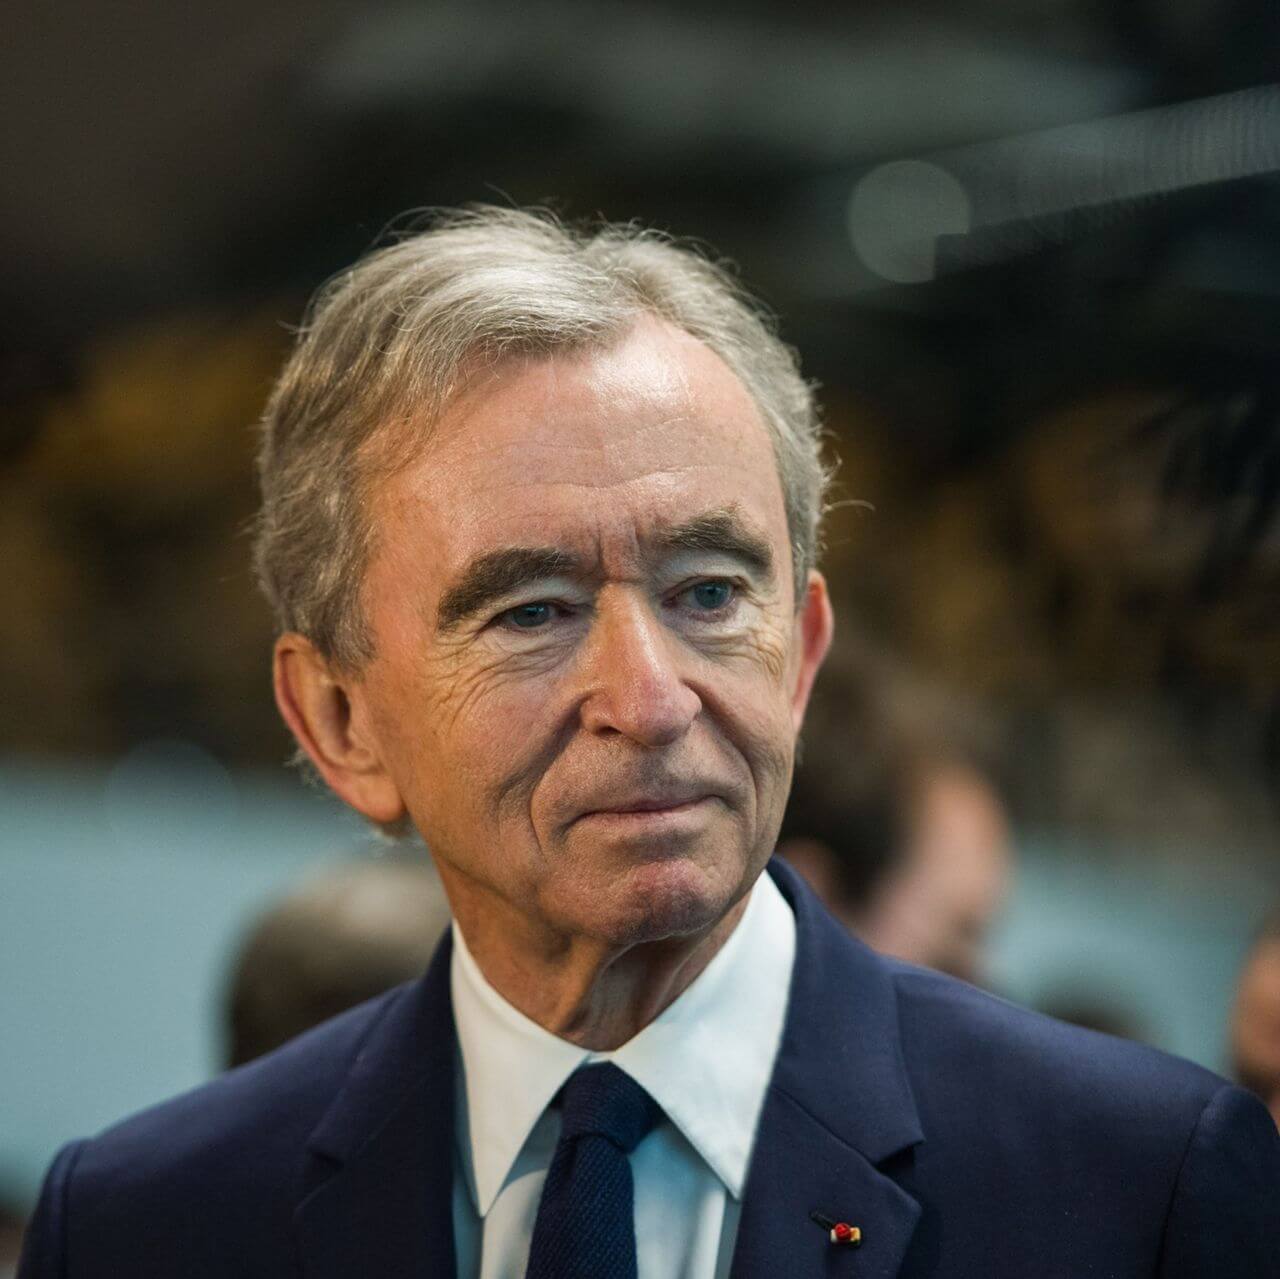 How the world's richest person Bernard Arnault lost over $11